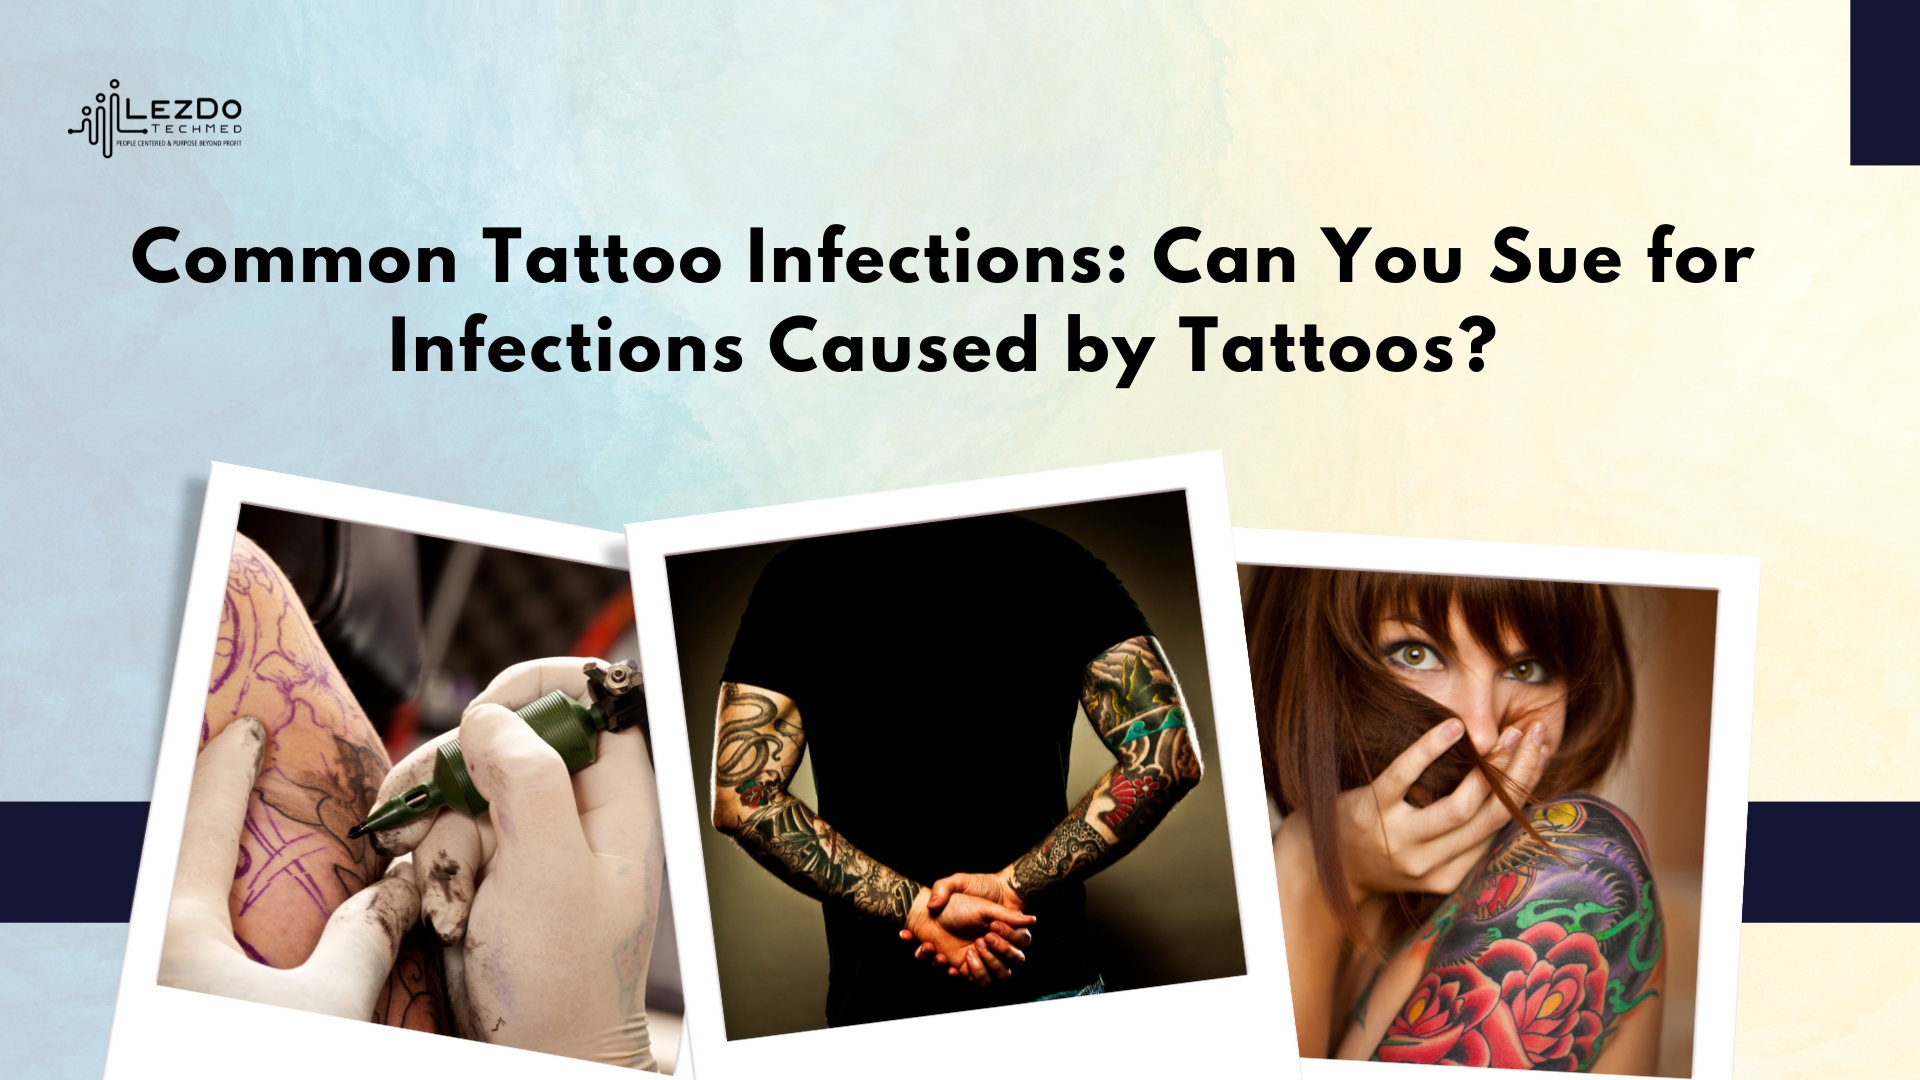 Common Tattoo Infections: Can You Sue for Infections Caused by Tattoos?